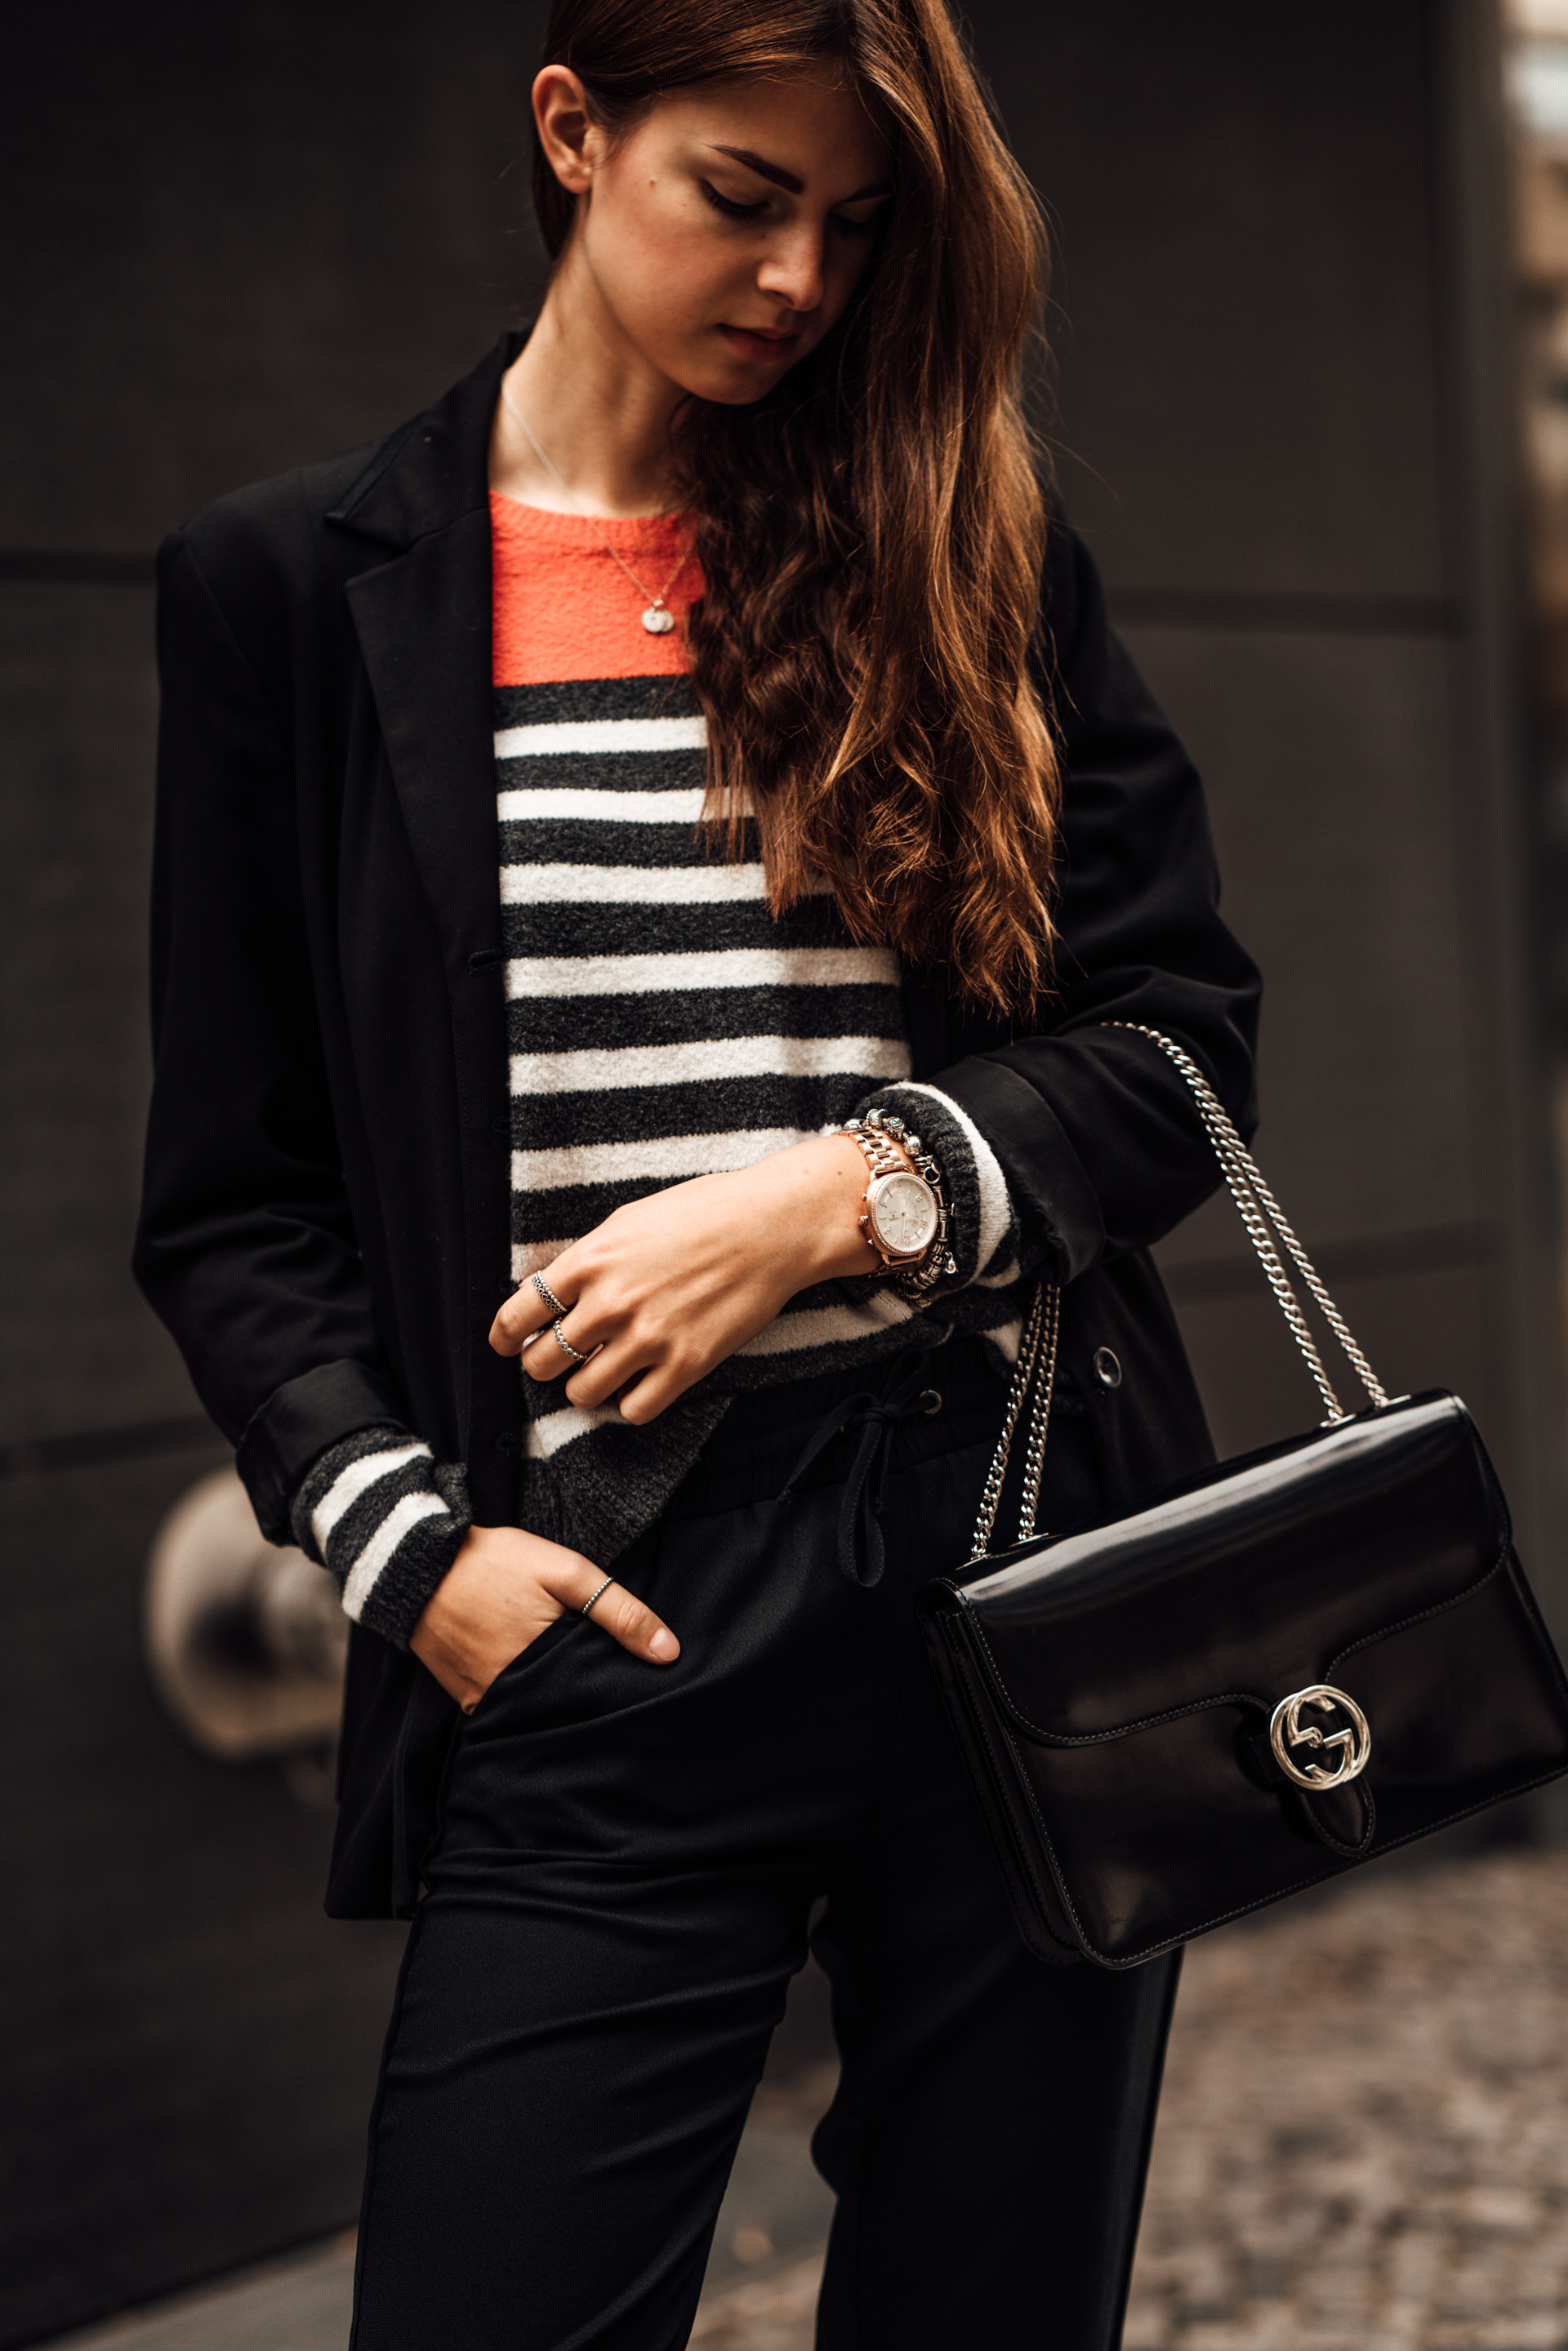 How to wear casual chic: striped sweater and black blazer